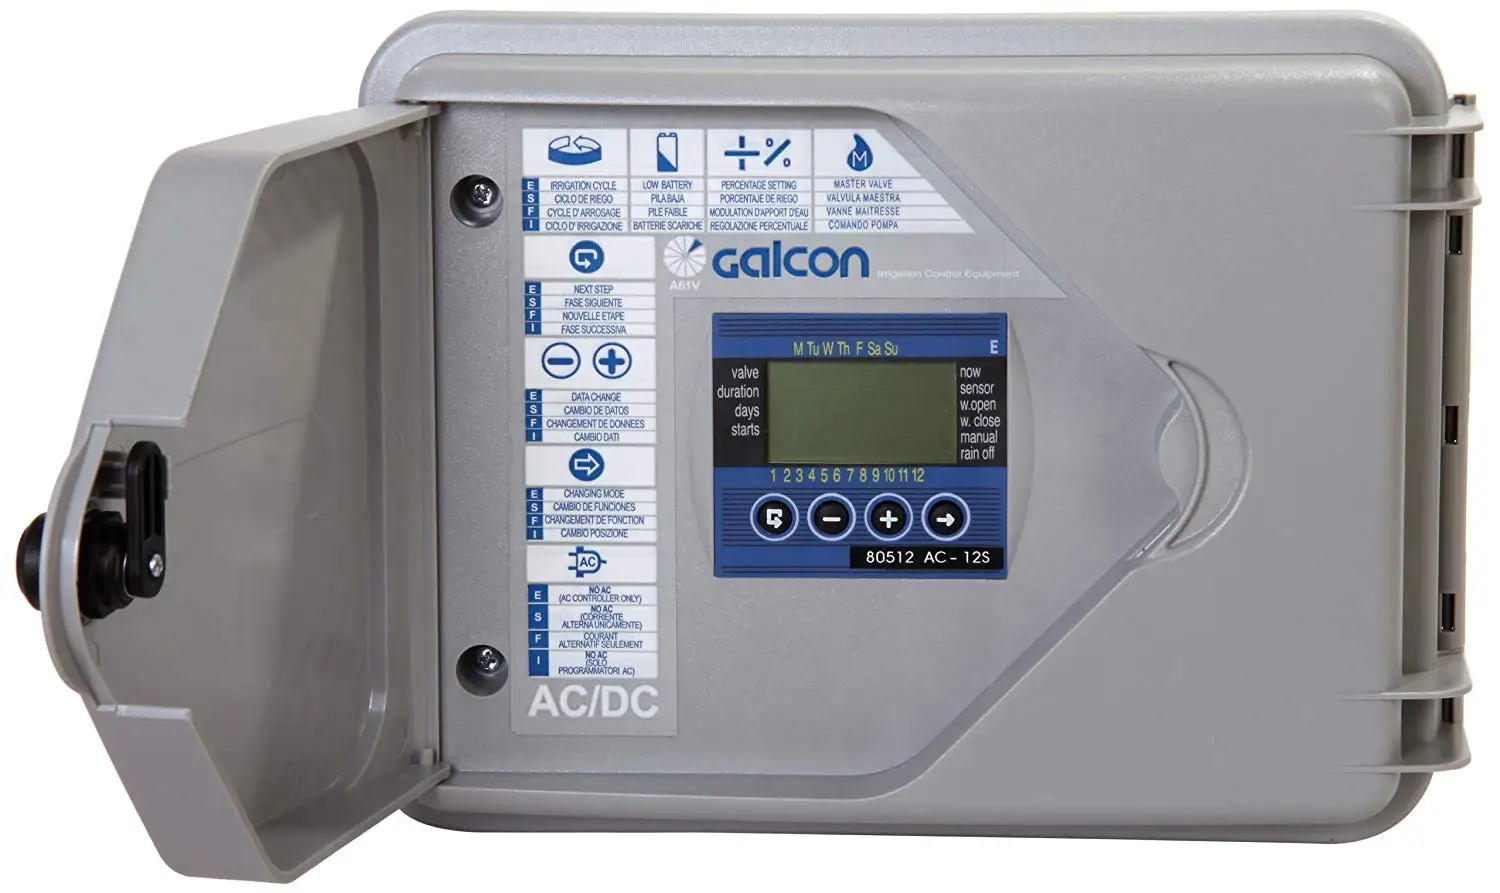 galcon computerized control systems